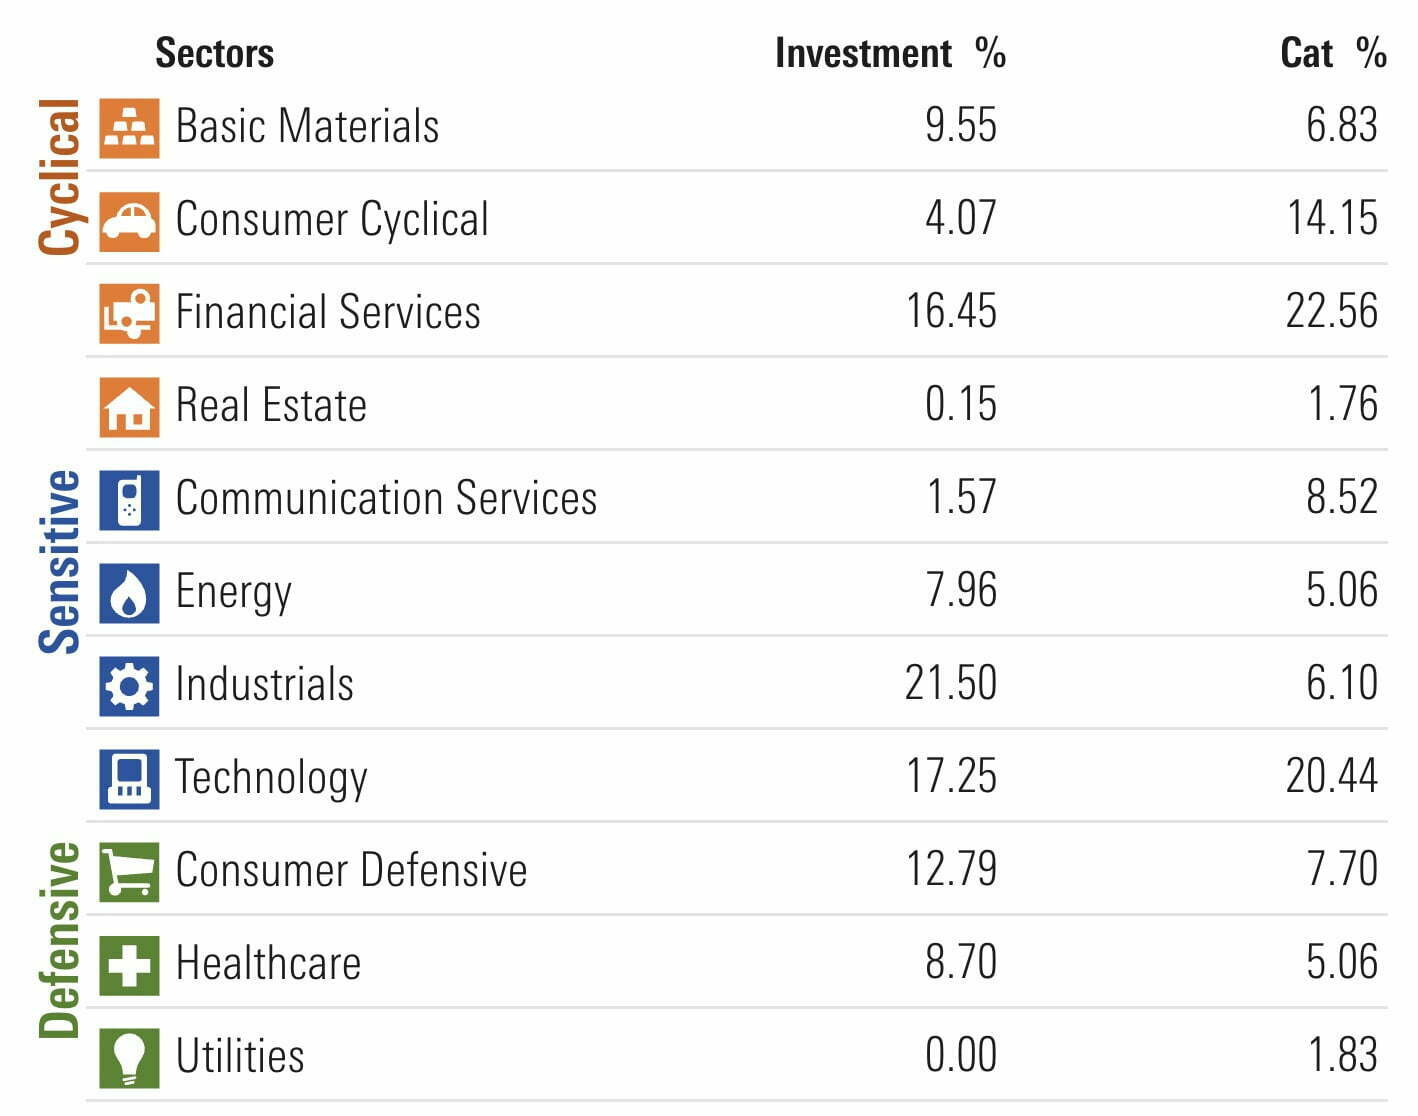 RAYE ETF Sectors including cyclical, sensitive and defensive